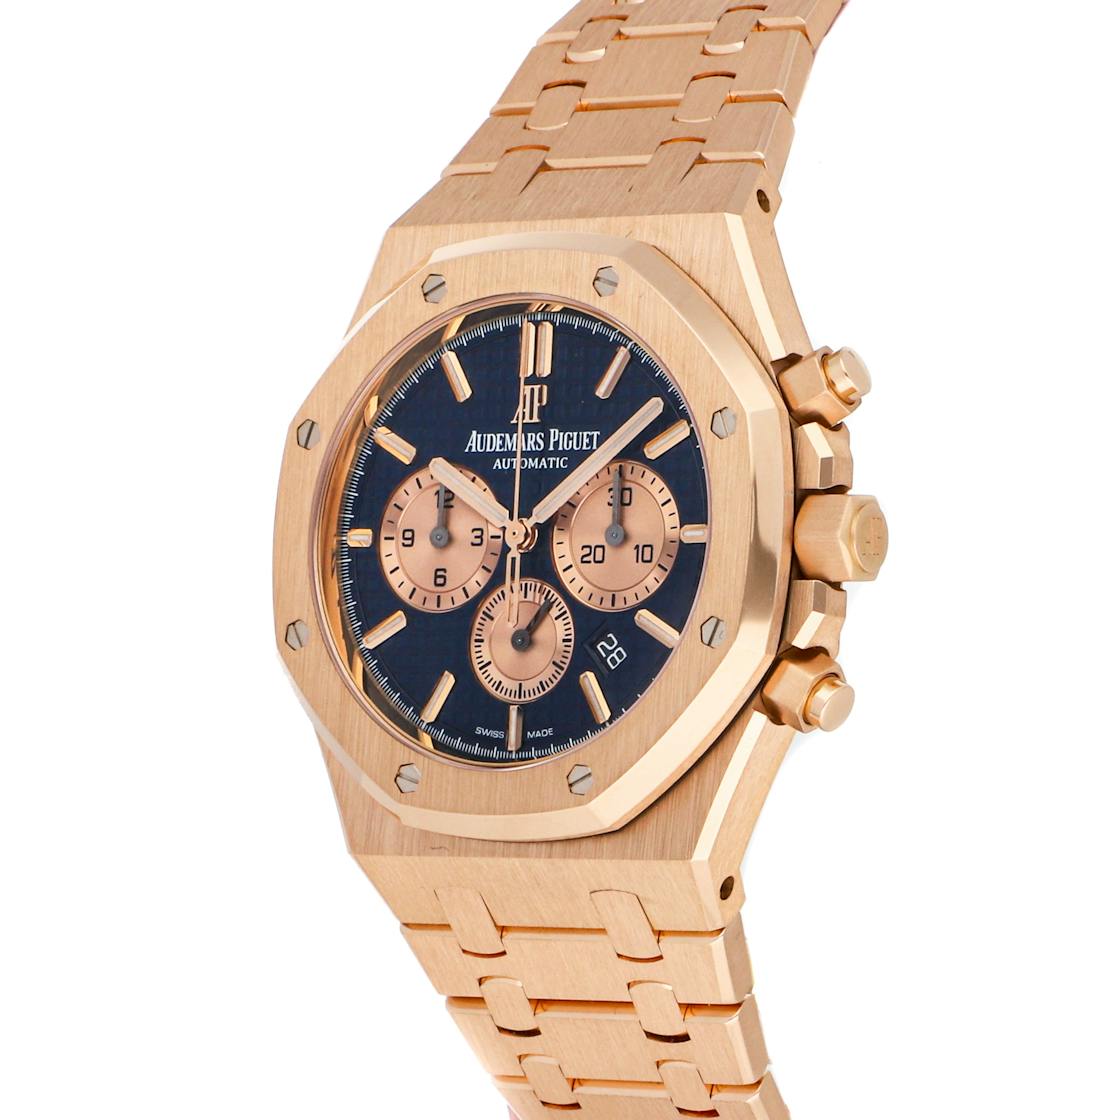 Audemars Piguet Royal Oak Chronograph Black Dial 18kt Pink gold  26320OR.OO.1220OR.01 Pre-Owned - Big Watch Buyers